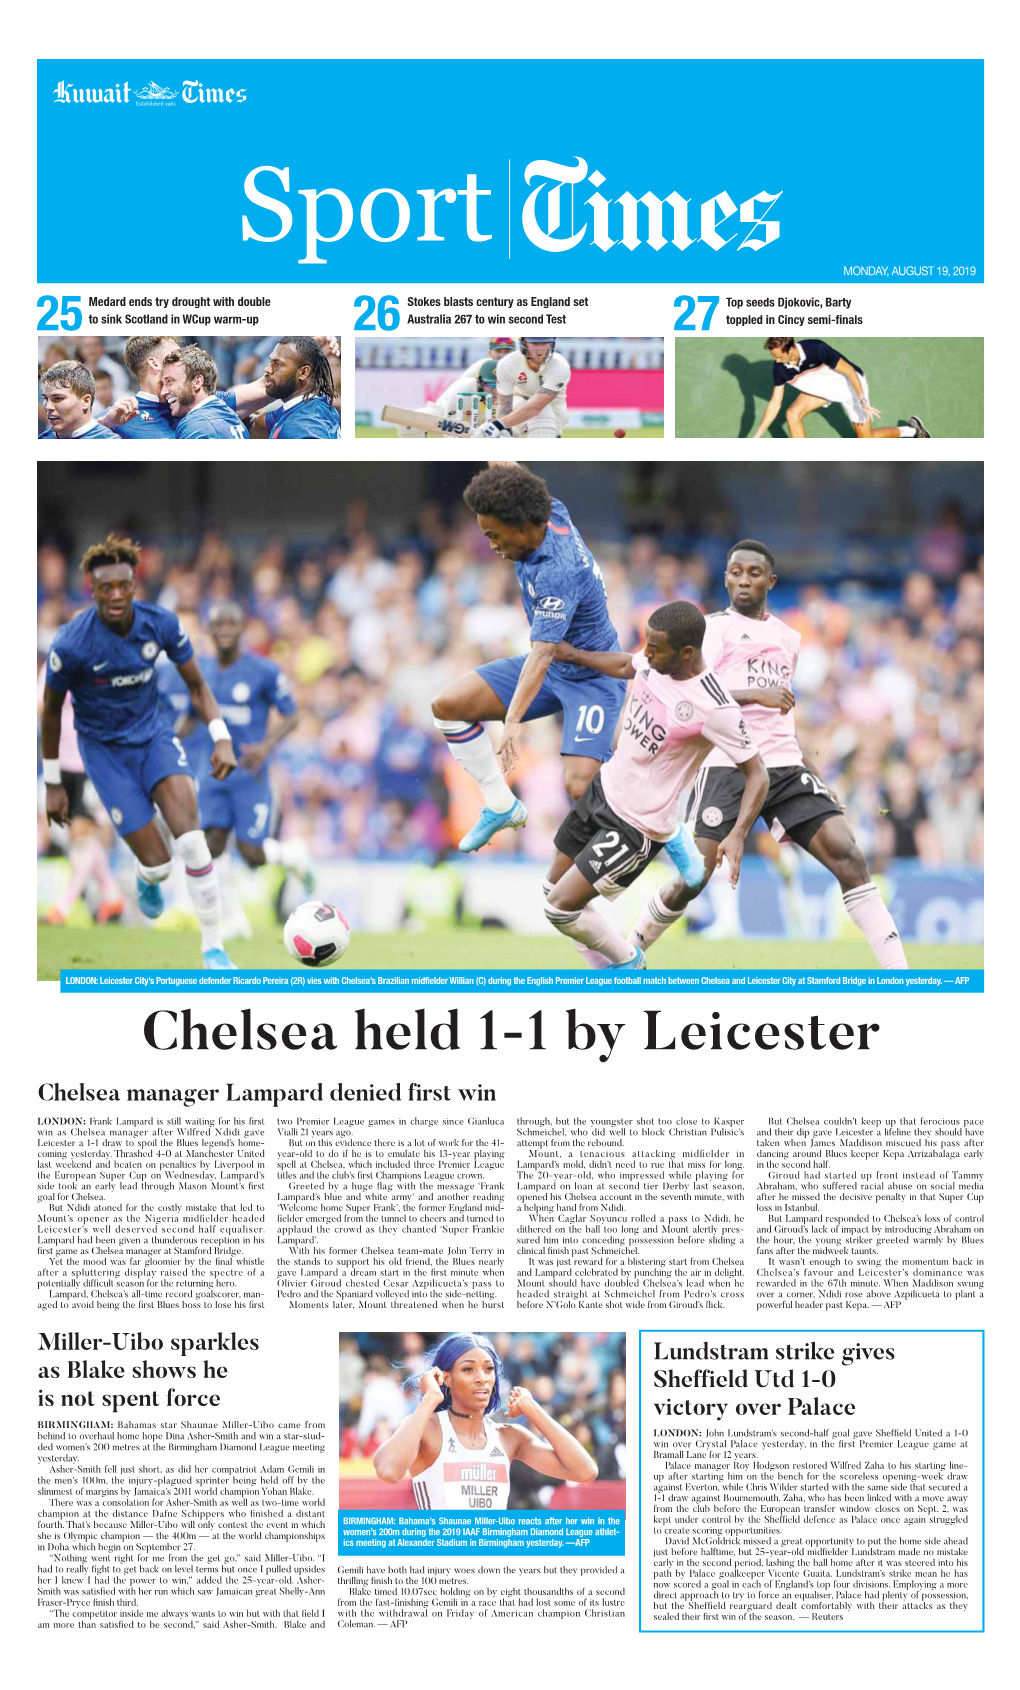 Chelsea Held 1-1 by Leicester Chelsea Manager Lampard Denied First Win